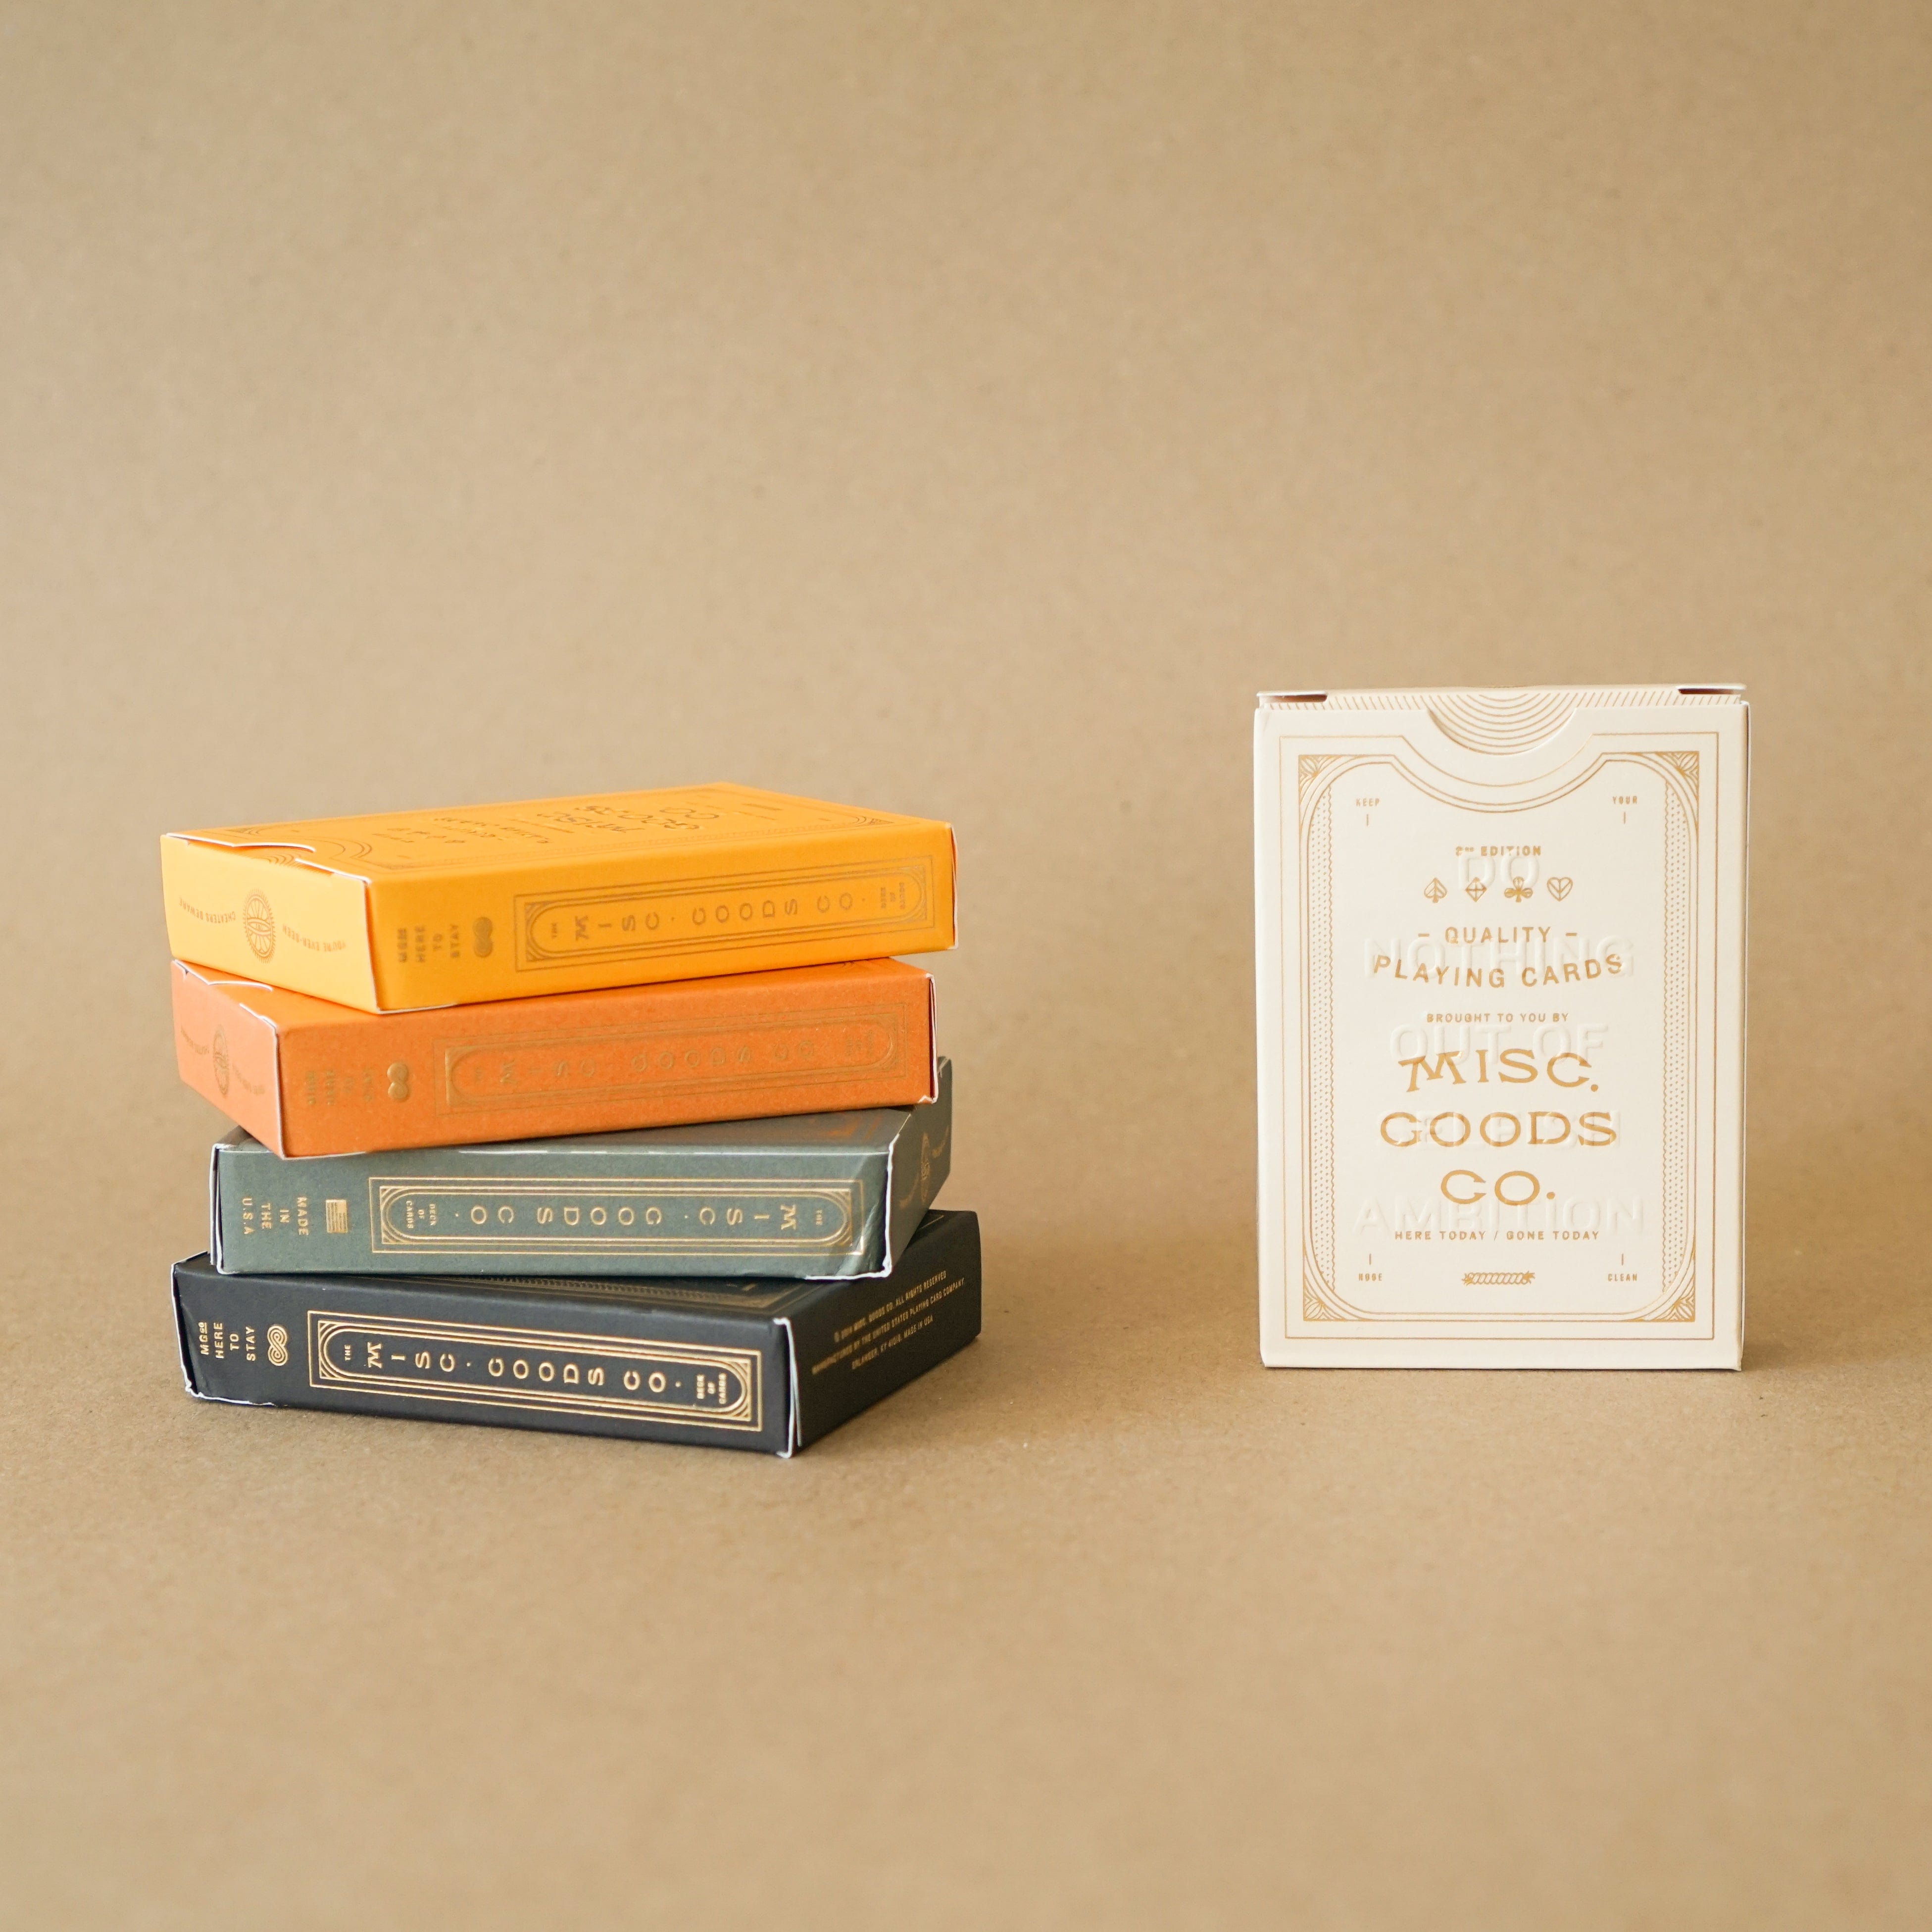 Misc Goods Co. Card Games Playing Cards